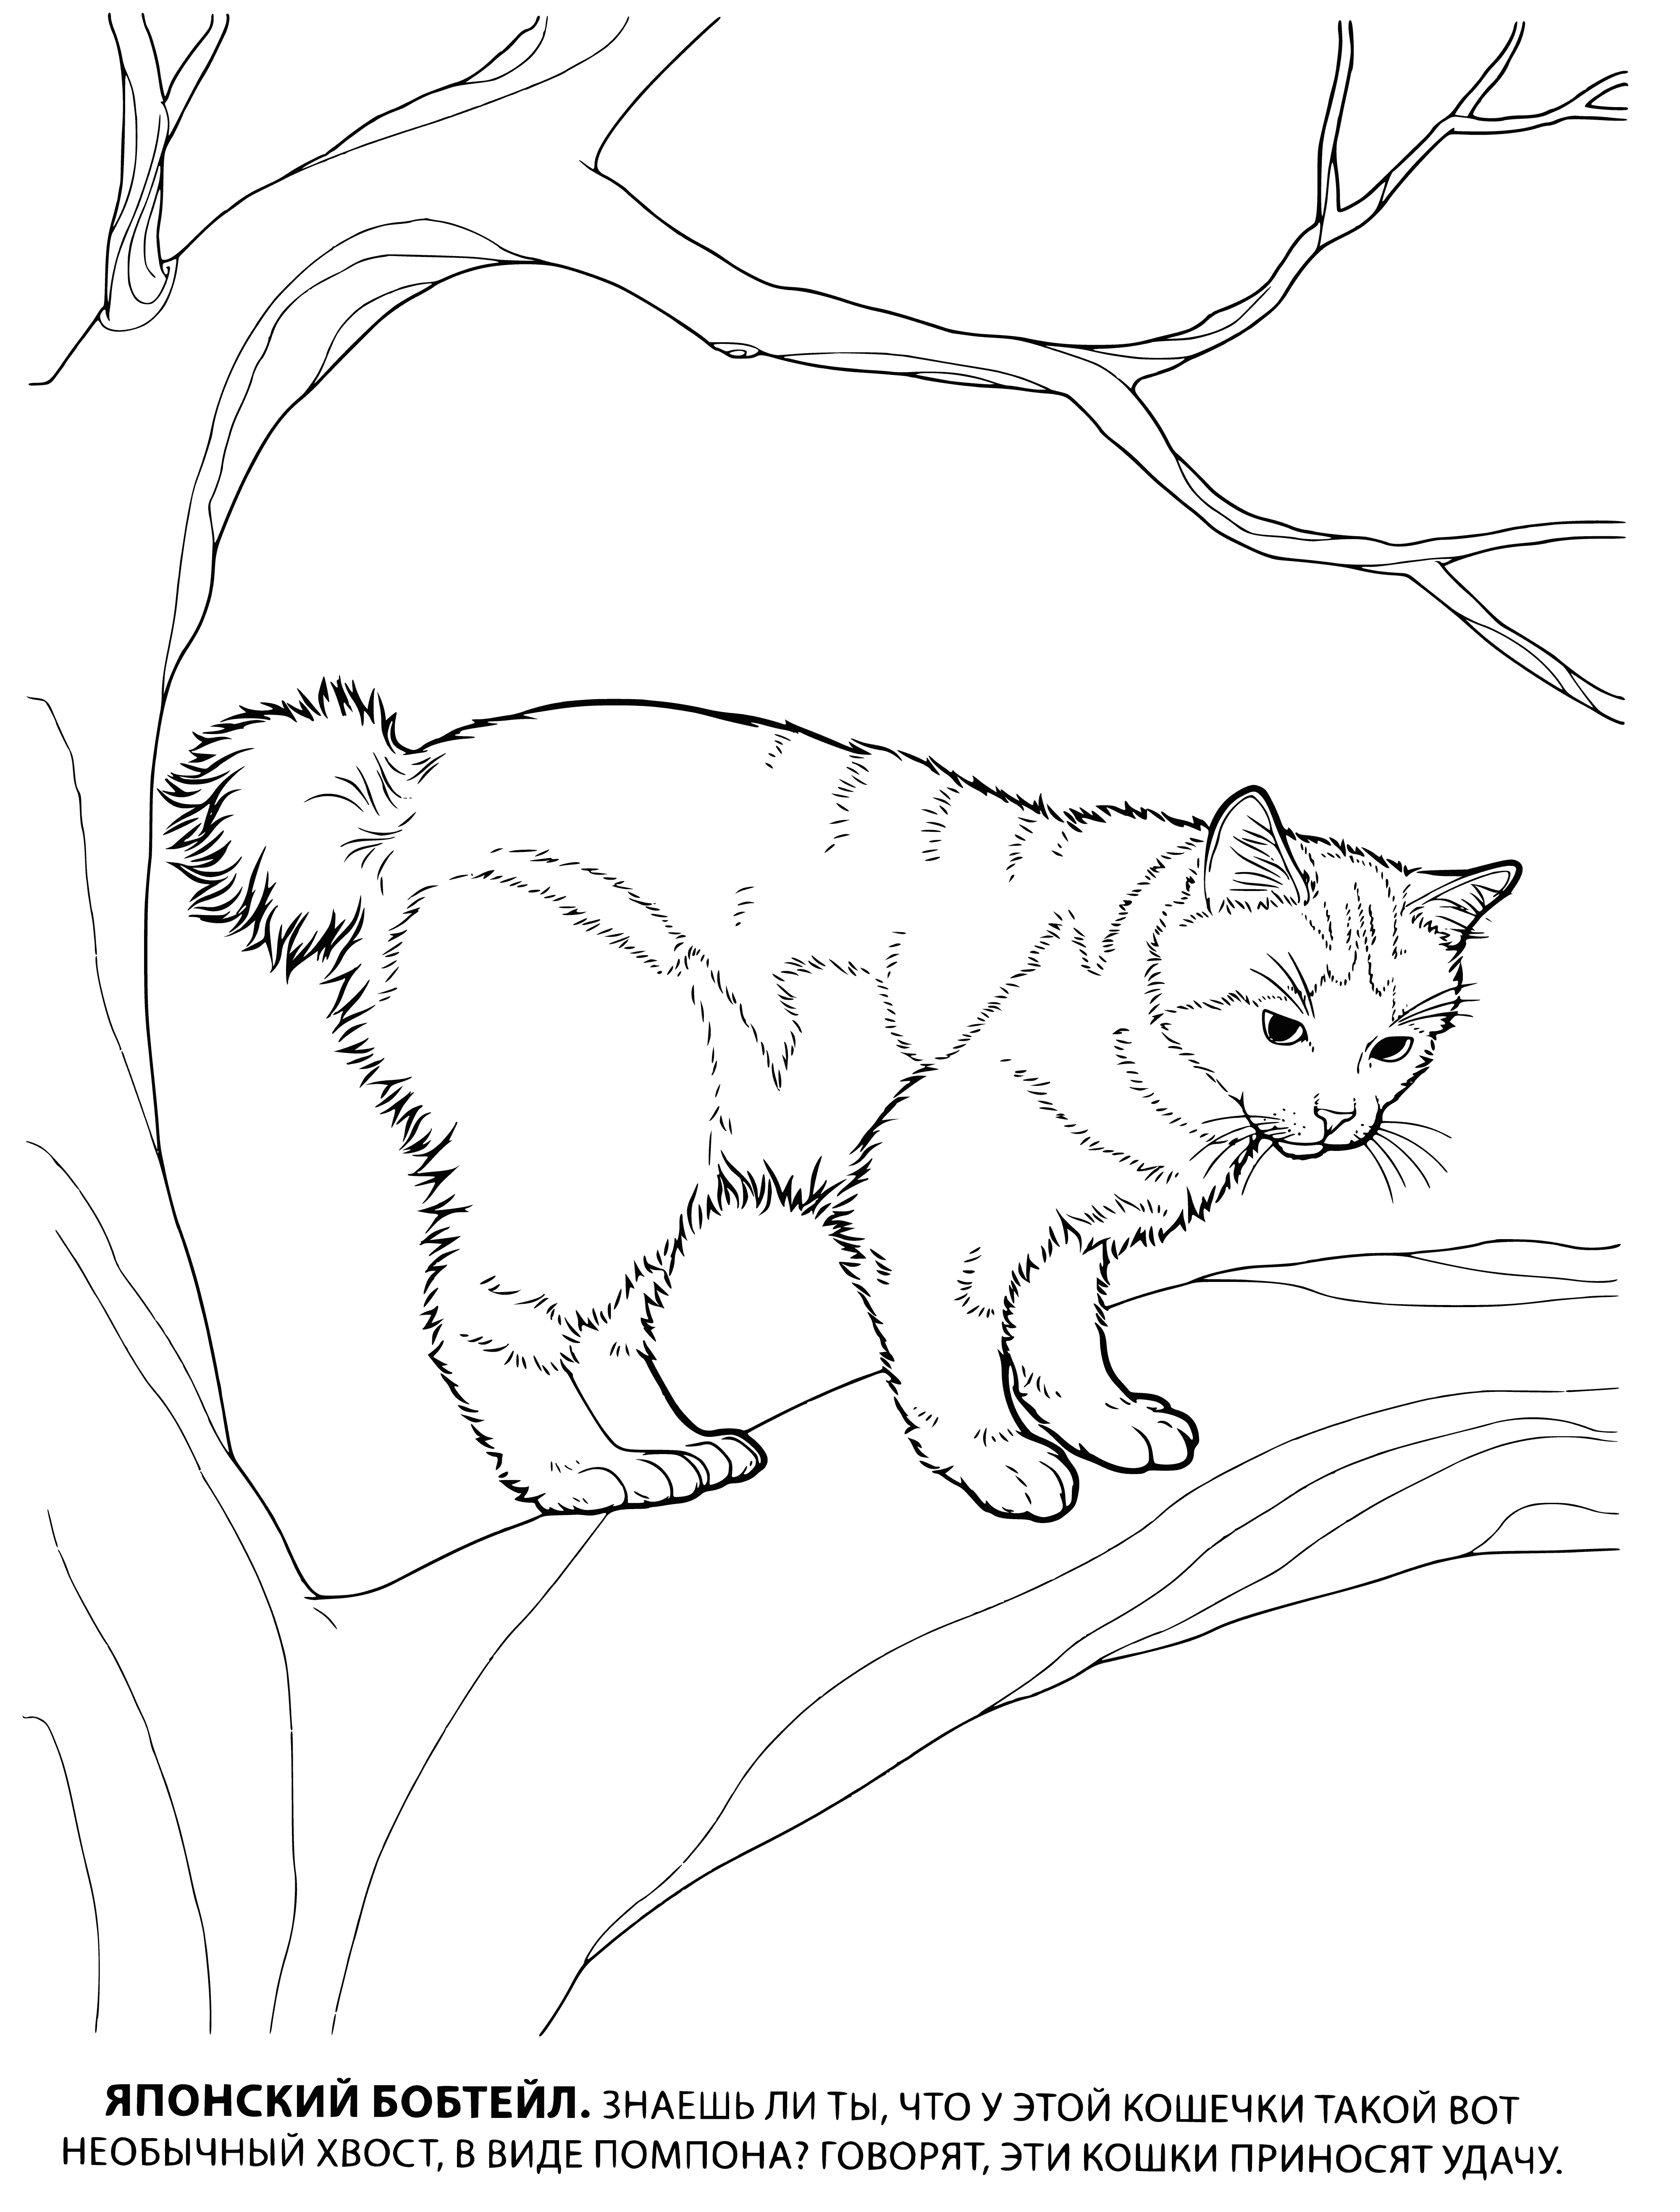 coloring page: Cute fluffy cat with triangular head and big ears; mostly white fur with brown patches and a stubby tail.